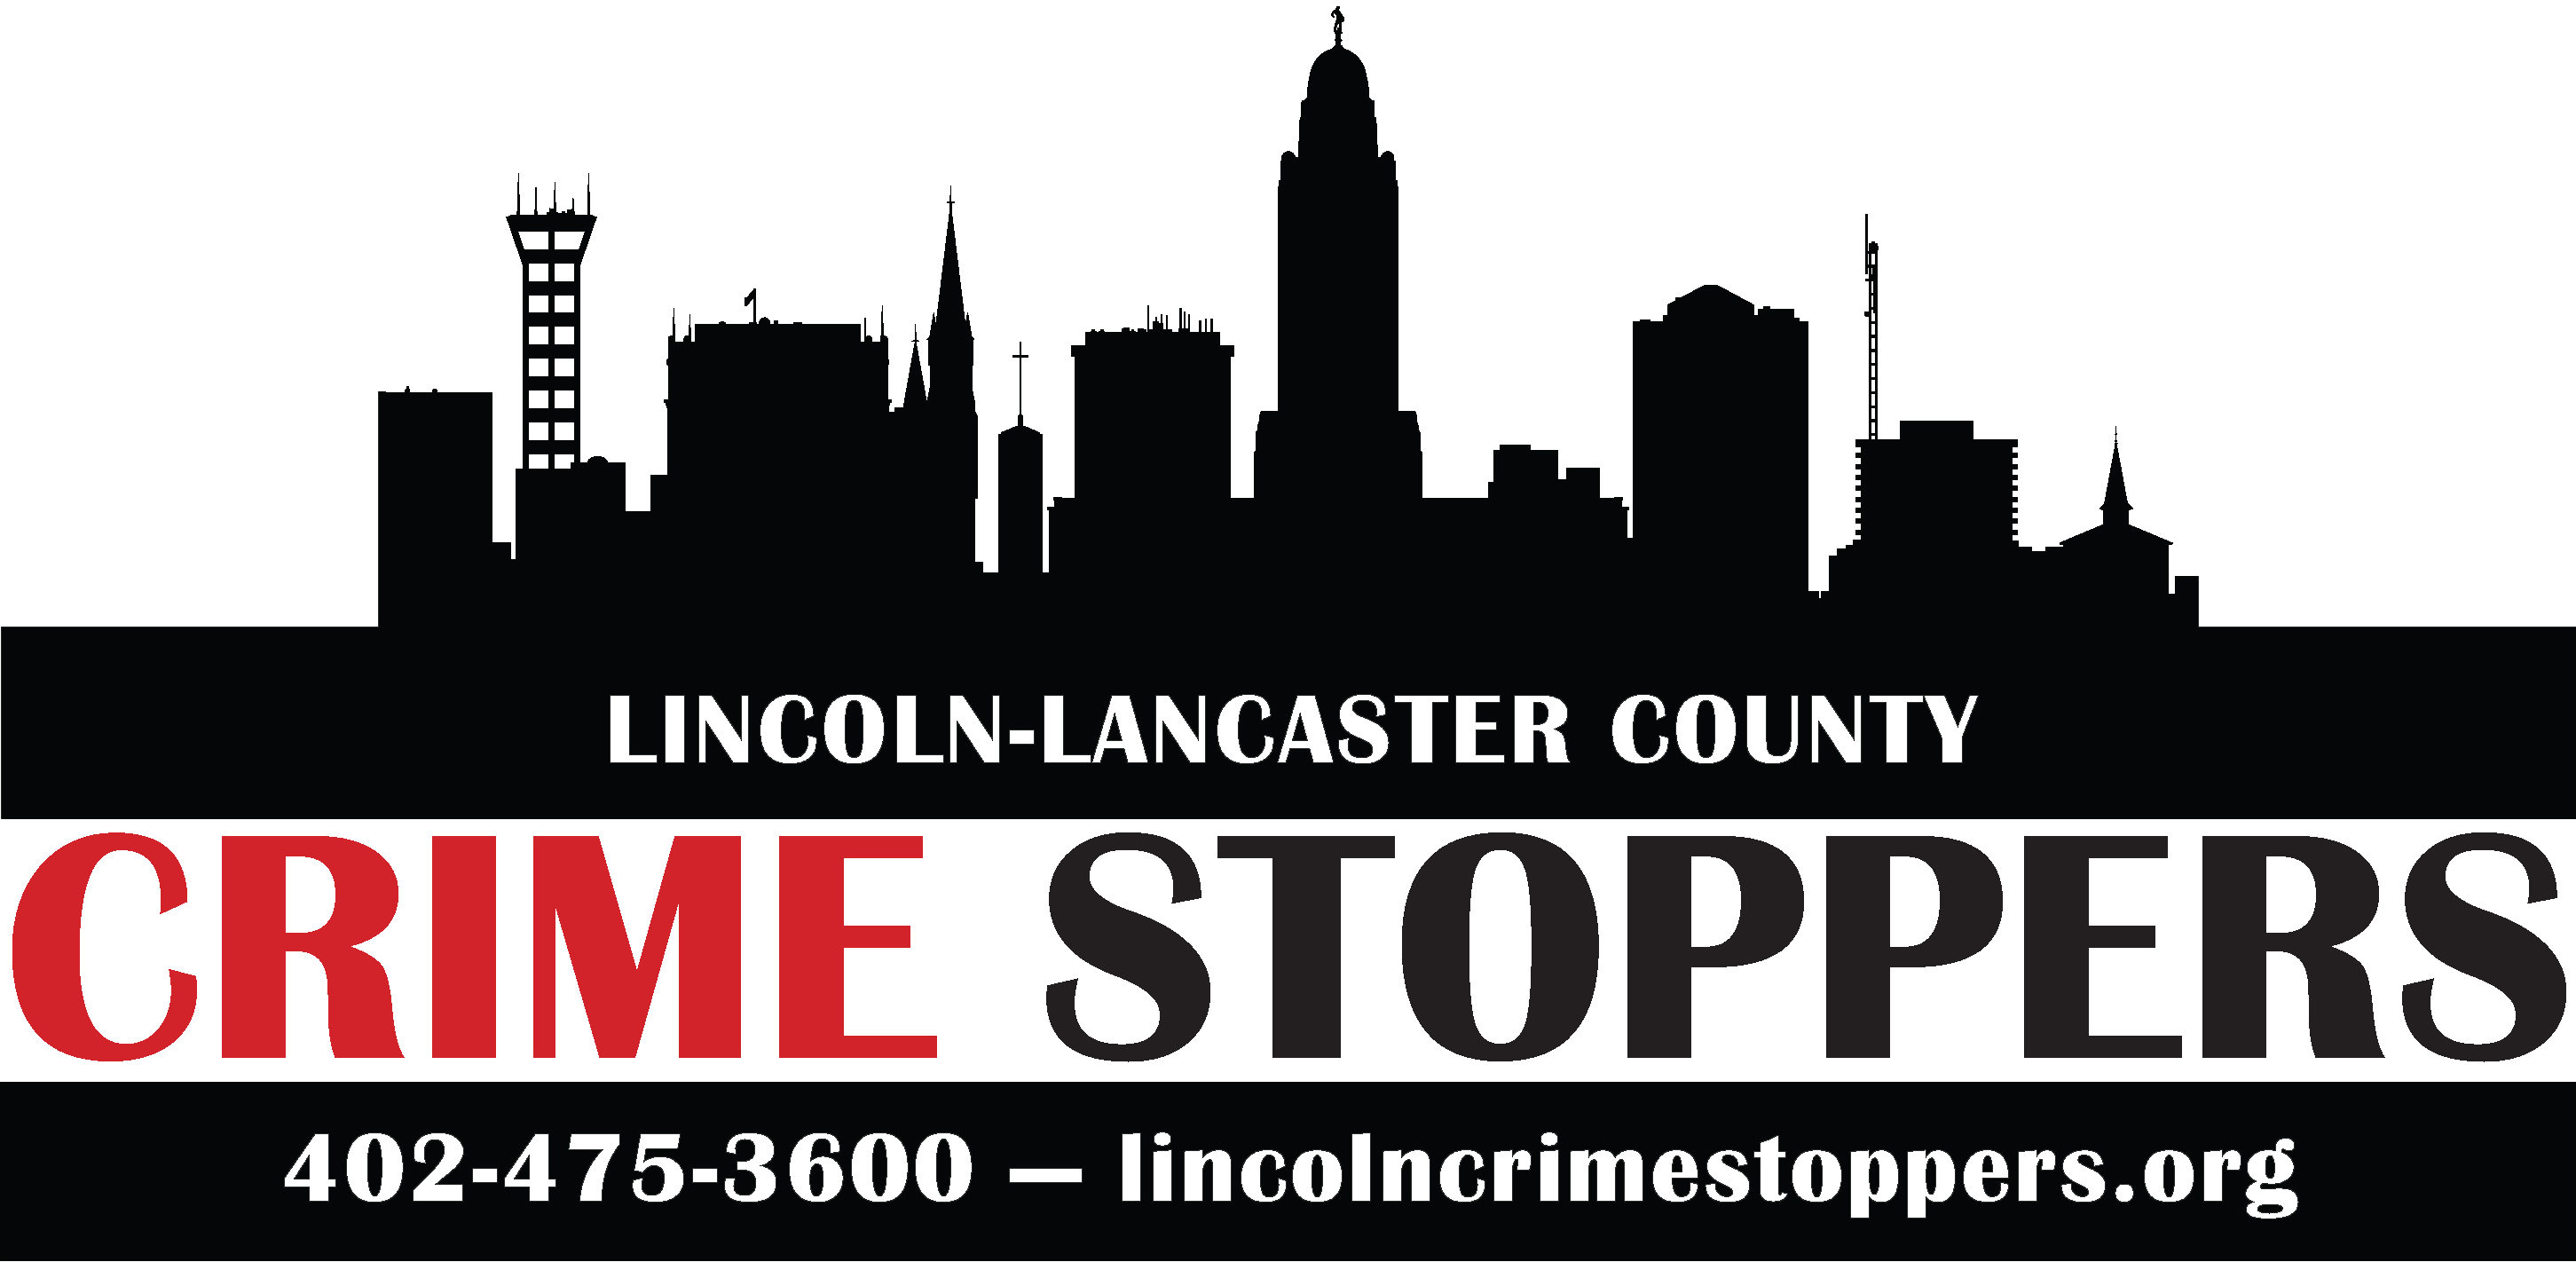 Lincoln-Lancaster County Crime Stoppers